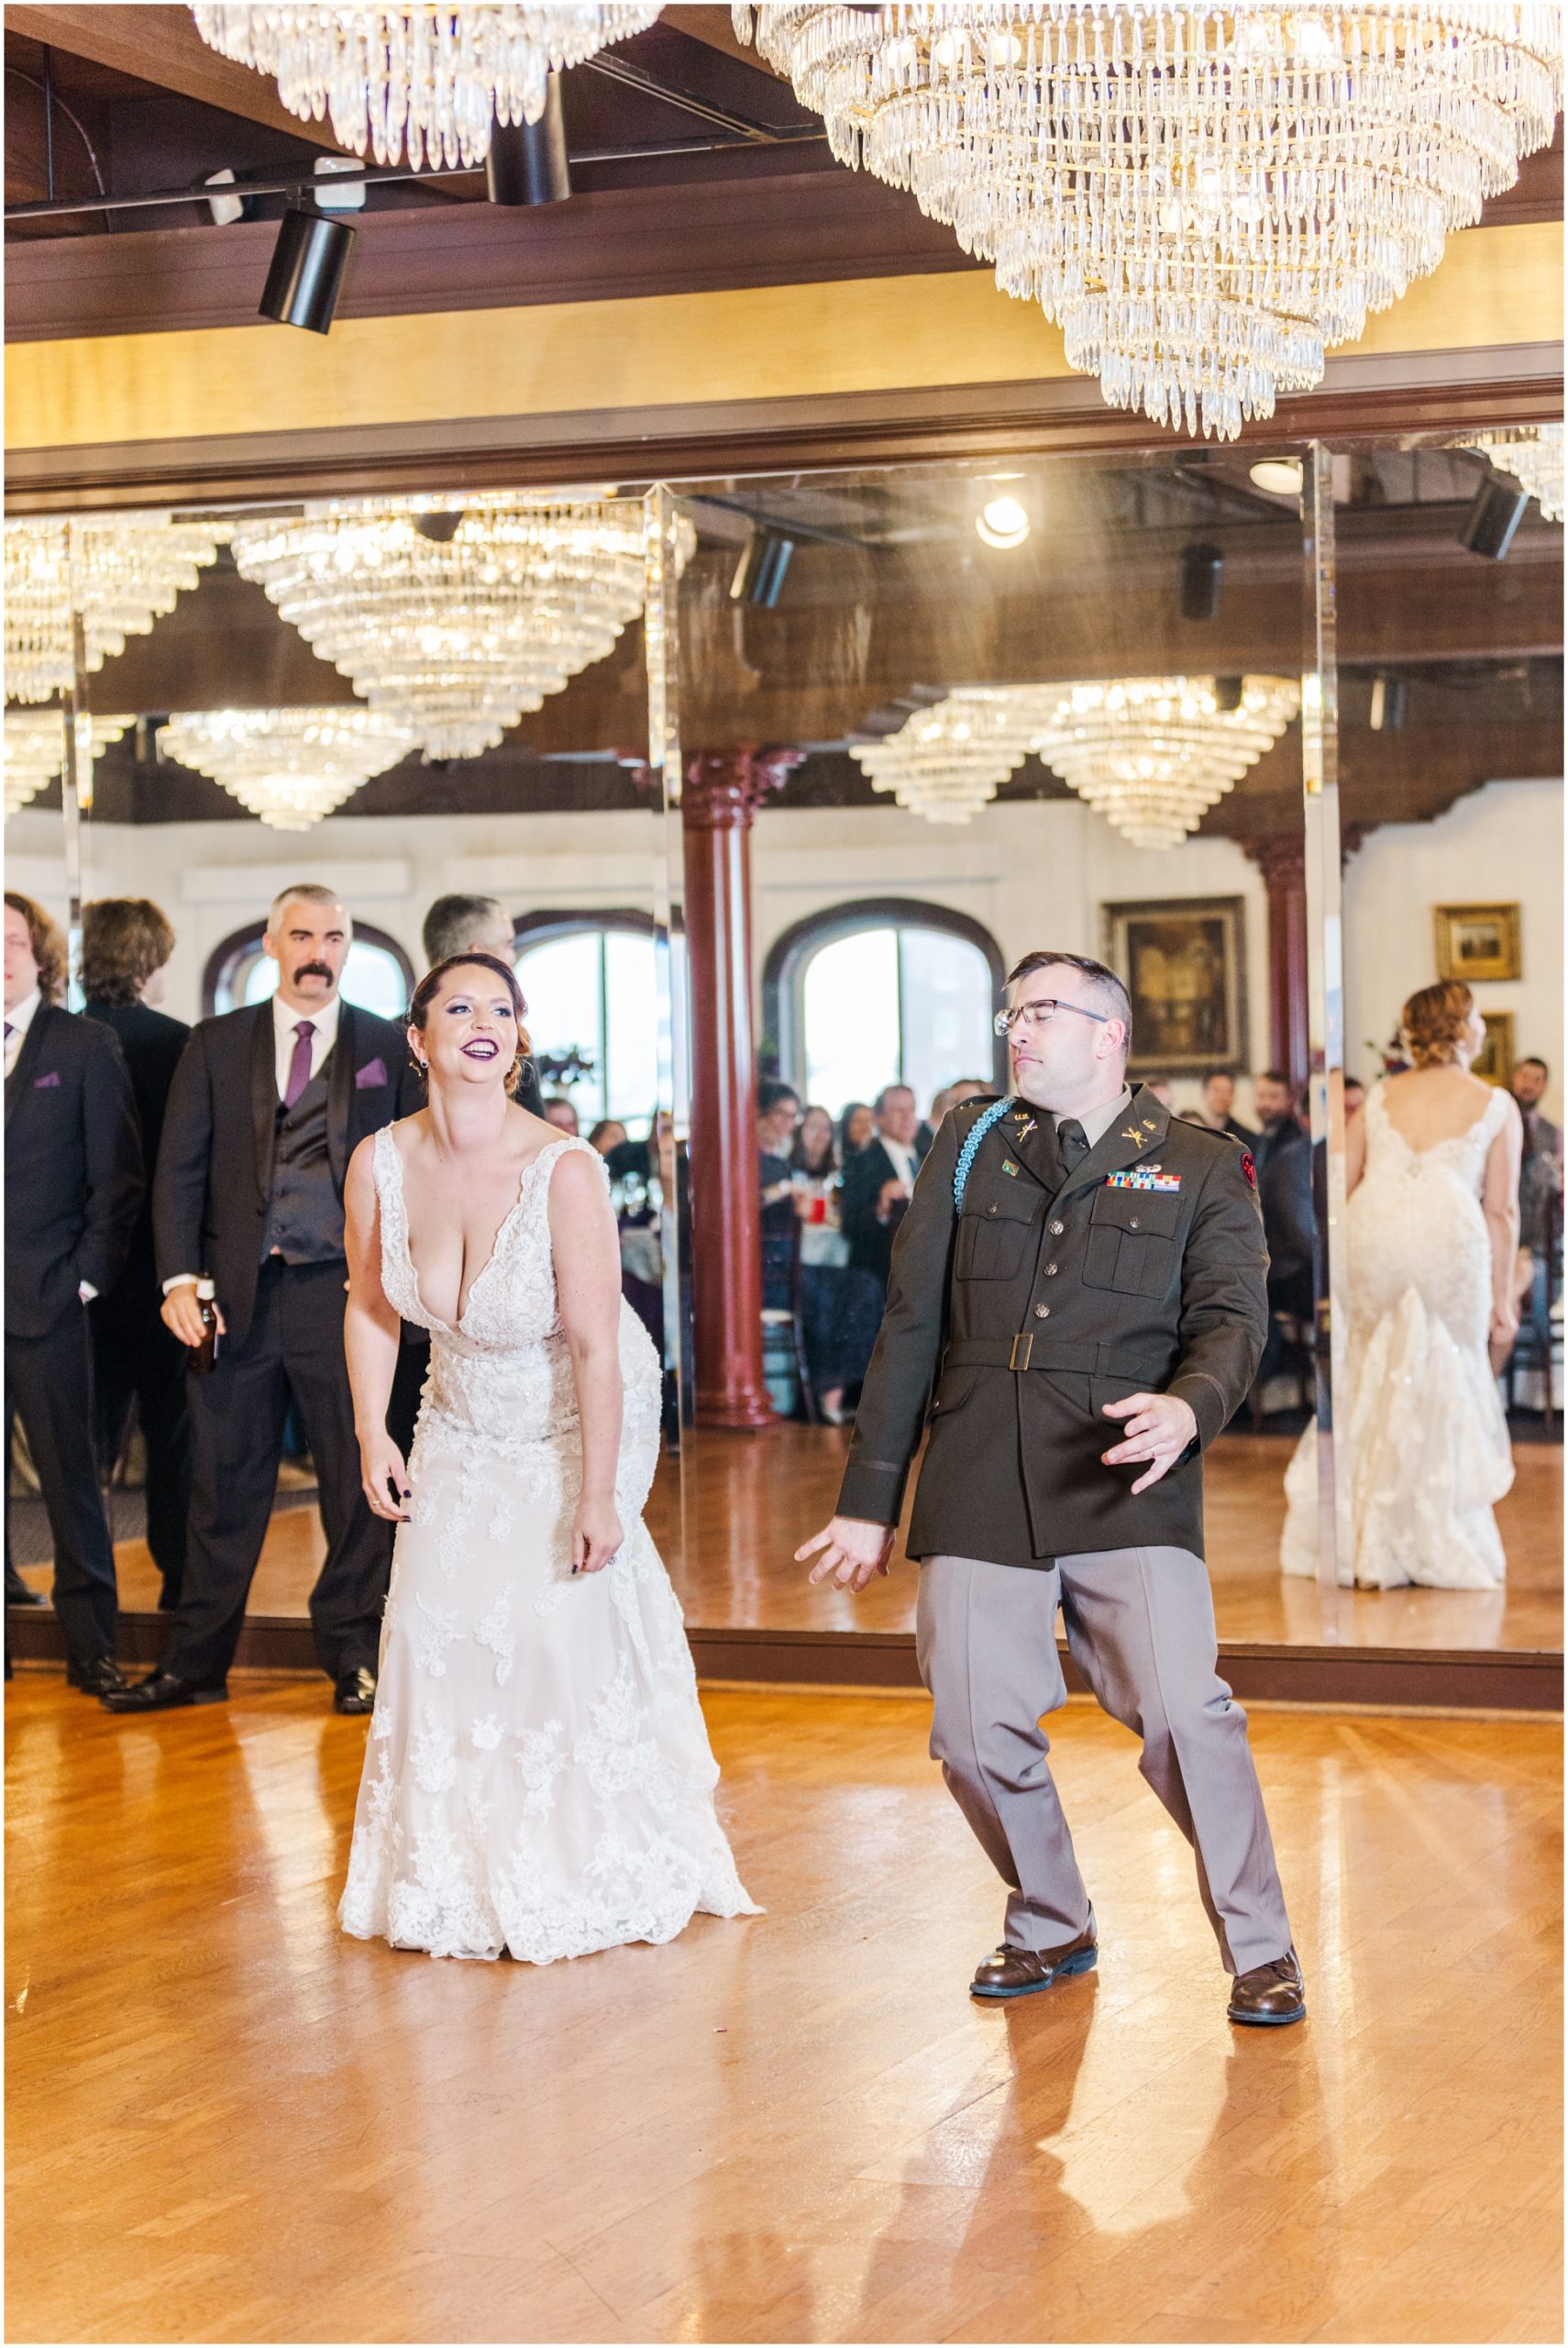 Fun Bride and groom Dance Moves